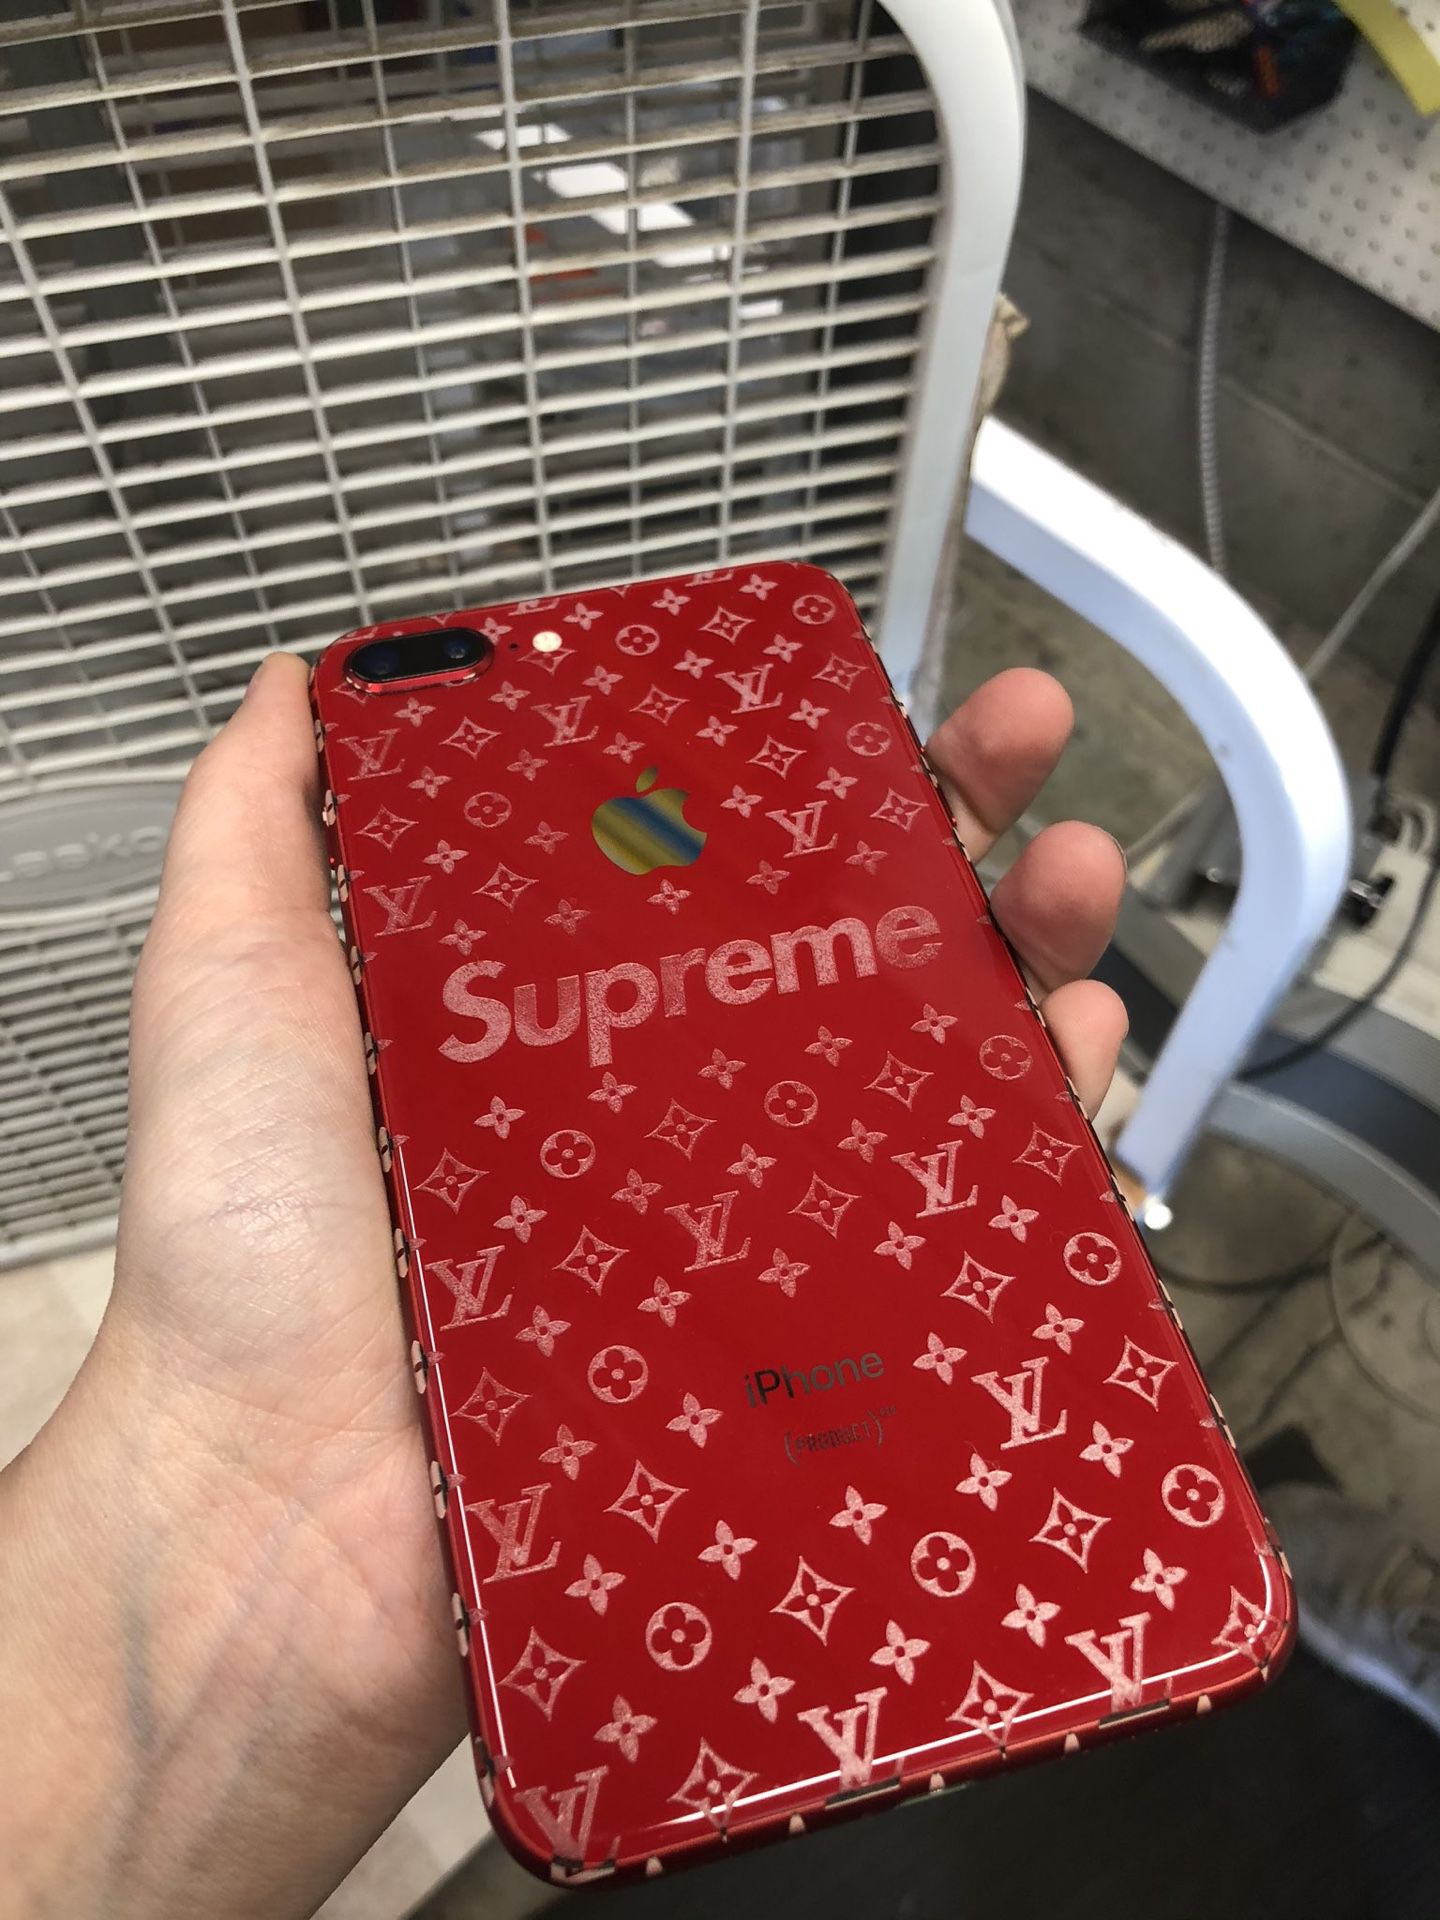 iPhone X/XS/XS Max/11 Laser Engraving/Back Glass Repair